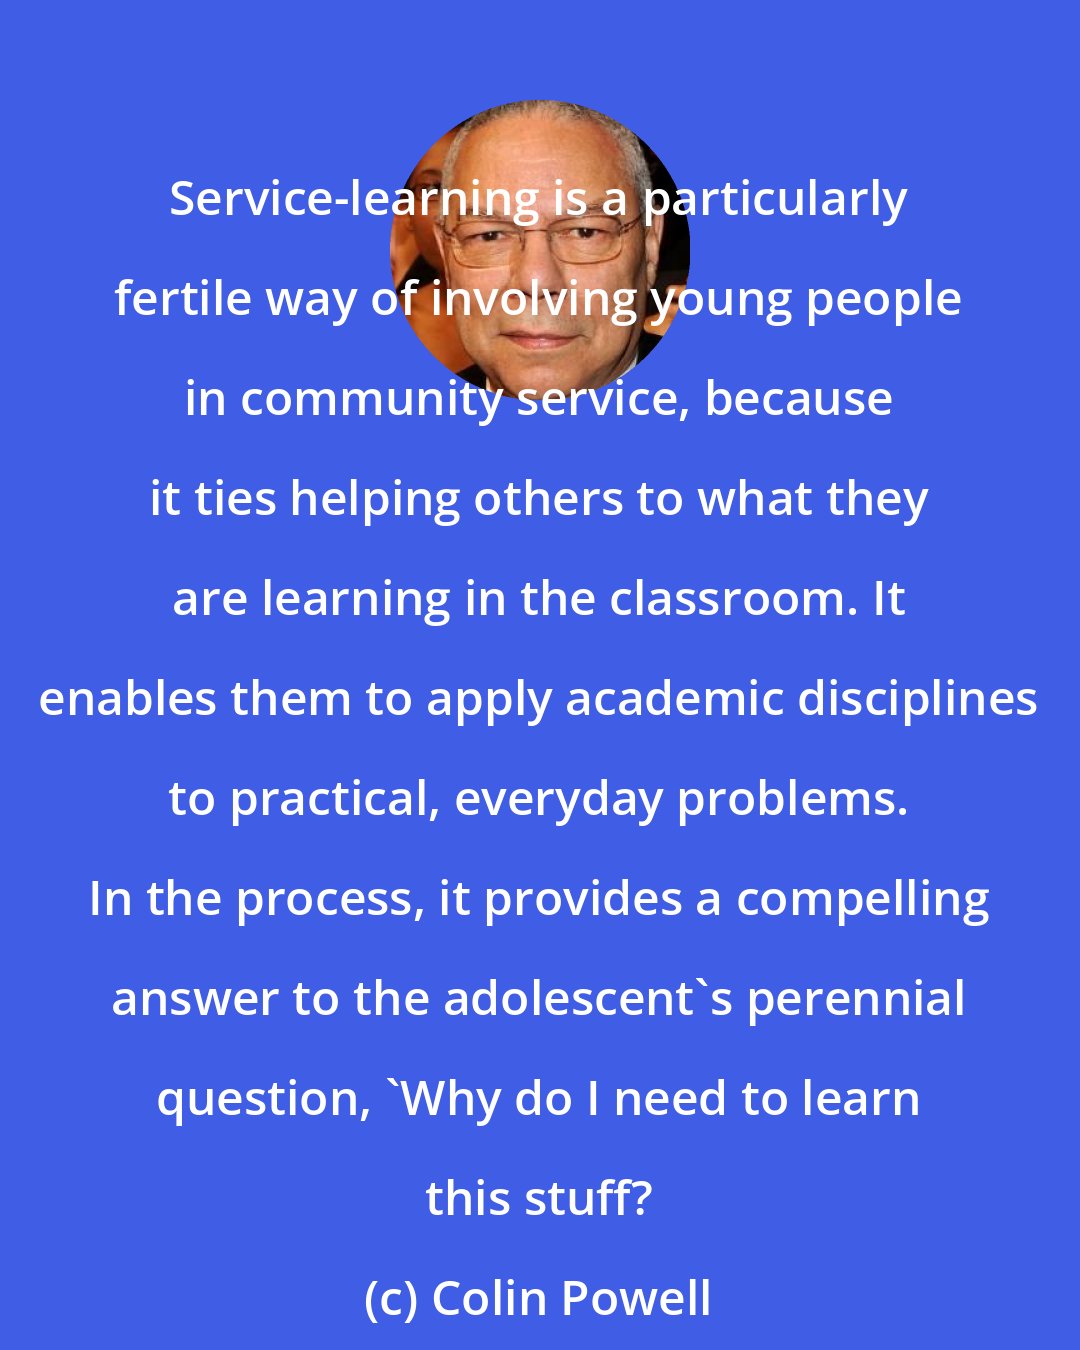 Colin Powell: Service-learning is a particularly fertile way of involving young people in community service, because it ties helping others to what they are learning in the classroom. It enables them to apply academic disciplines to practical, everyday problems. In the process, it provides a compelling answer to the adolescent's perennial question, 'Why do I need to learn this stuff?